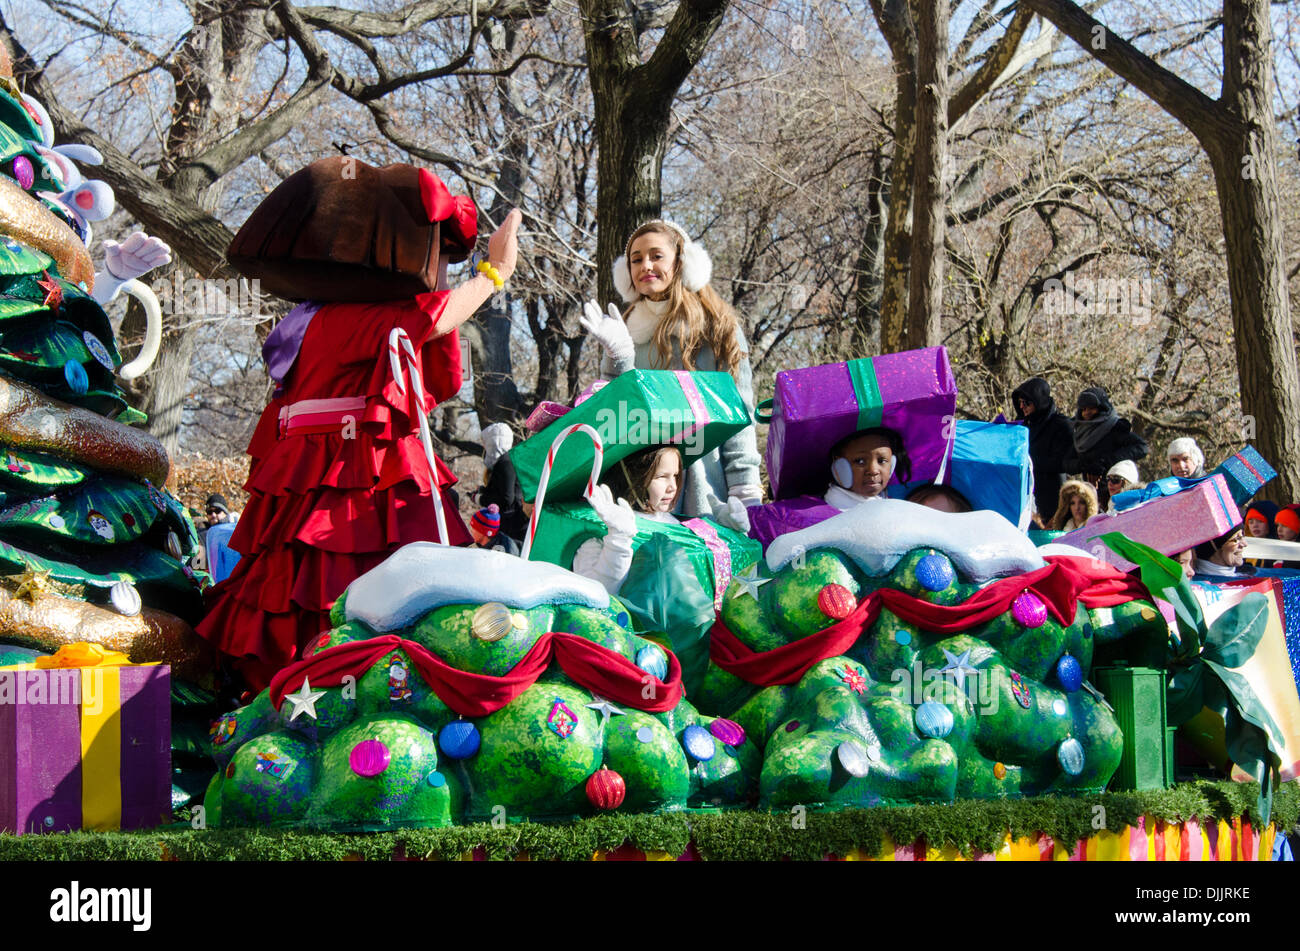 NEW YORK, NY, USA, Nov. 28, 2013. Ariana Grande waves from the Dora the Explorer  float in the 87th Annual Macy’s Thanksgiving Day Parade. Credit:  Jennifer Booher/Alamy Live News Stock Photo